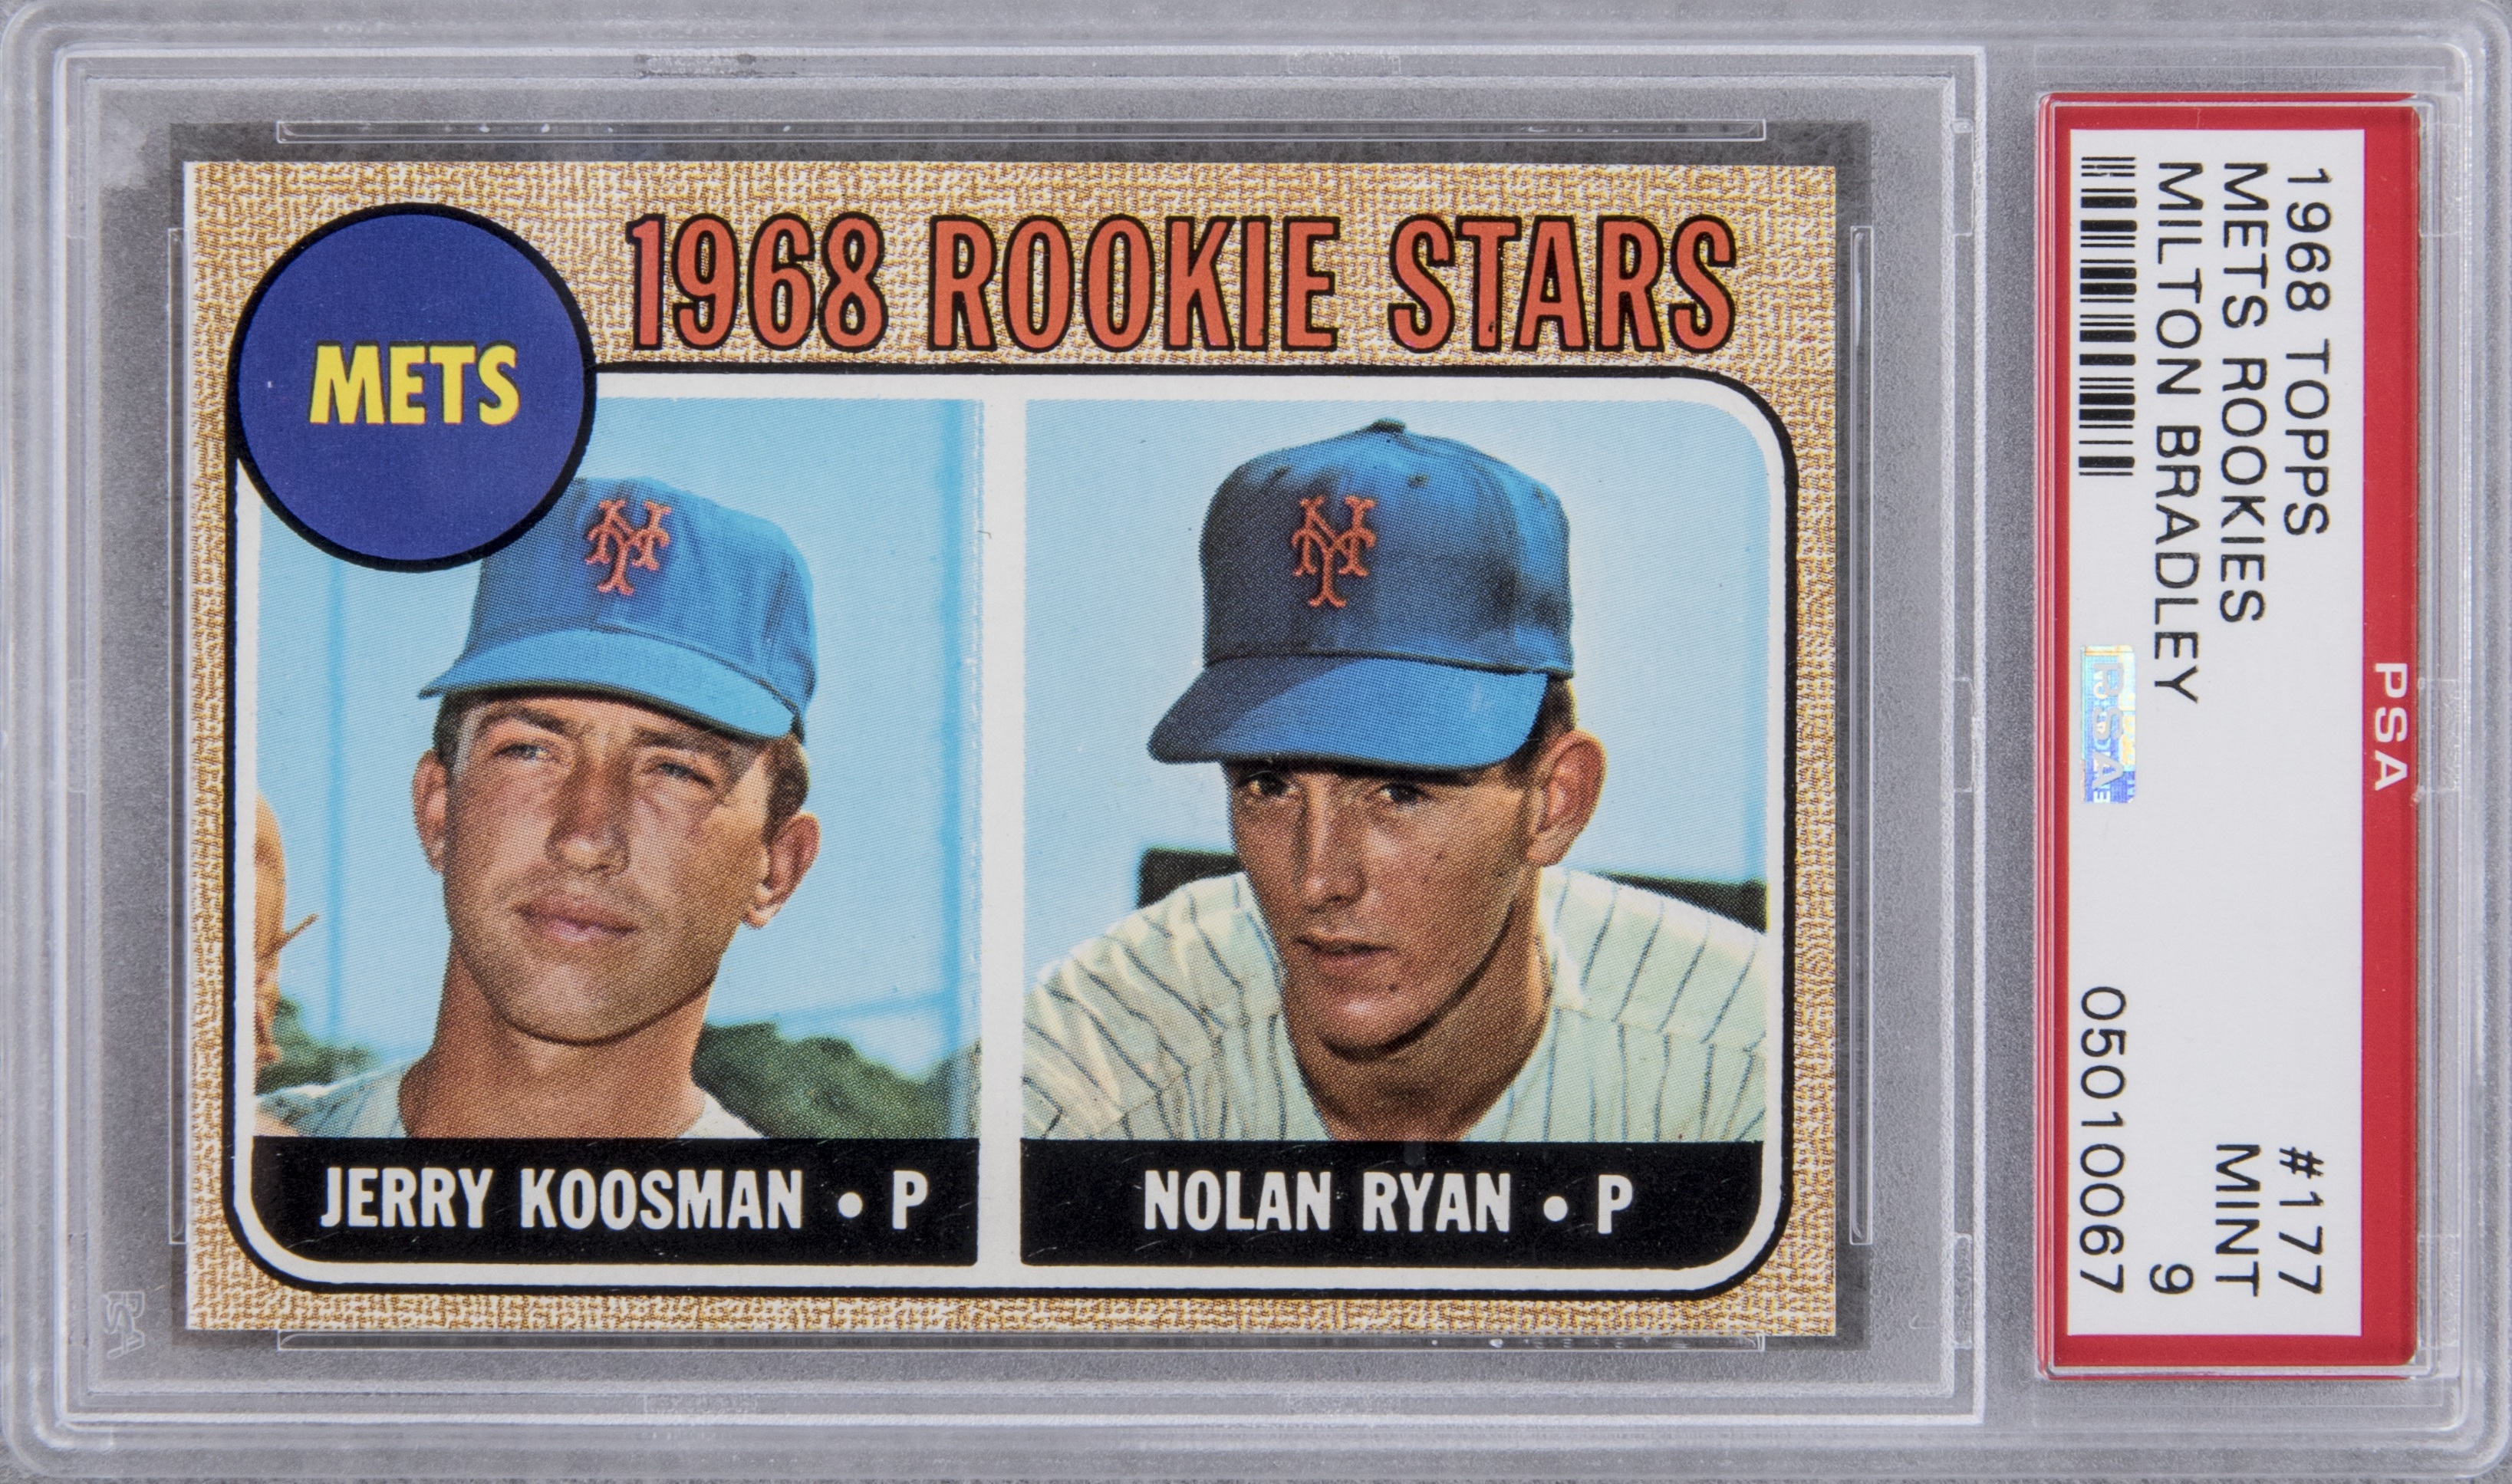 1968 Topps Nolan Ryan Rookie Card The Ultimate Collector S Guide Old Sports Cards